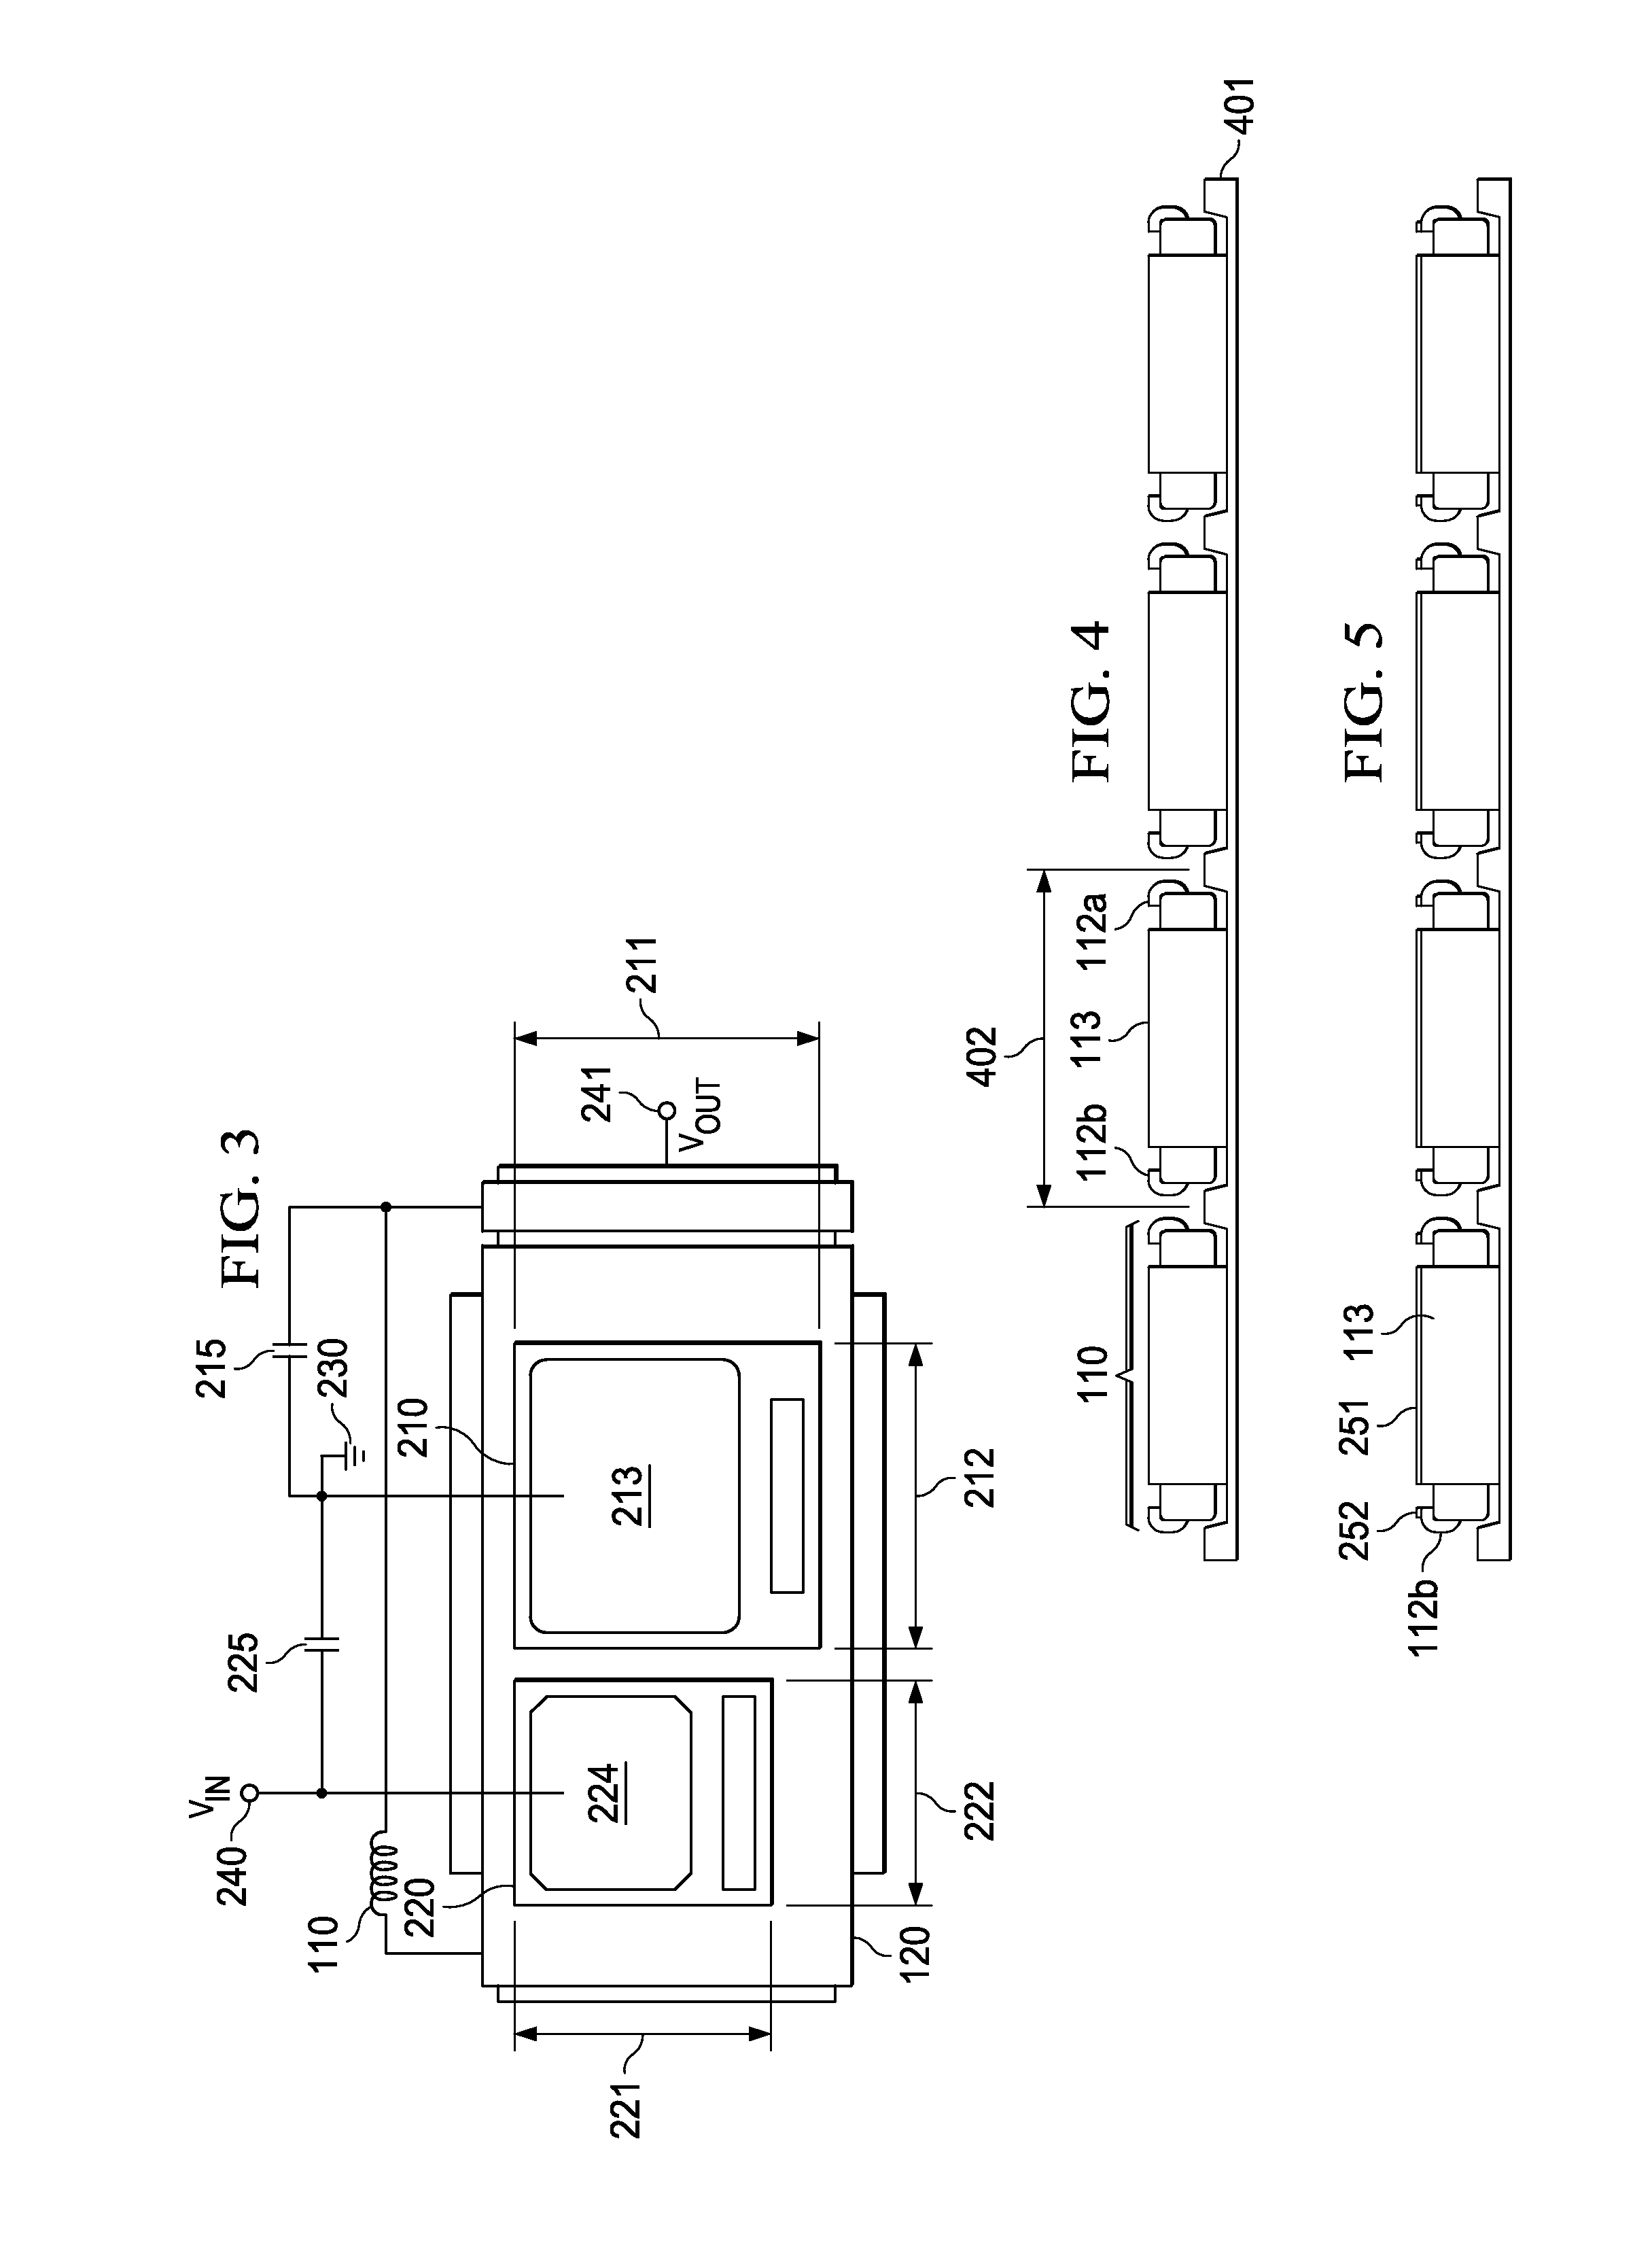 DC-DC converter vertically integrated with load inductor structured as heat sink